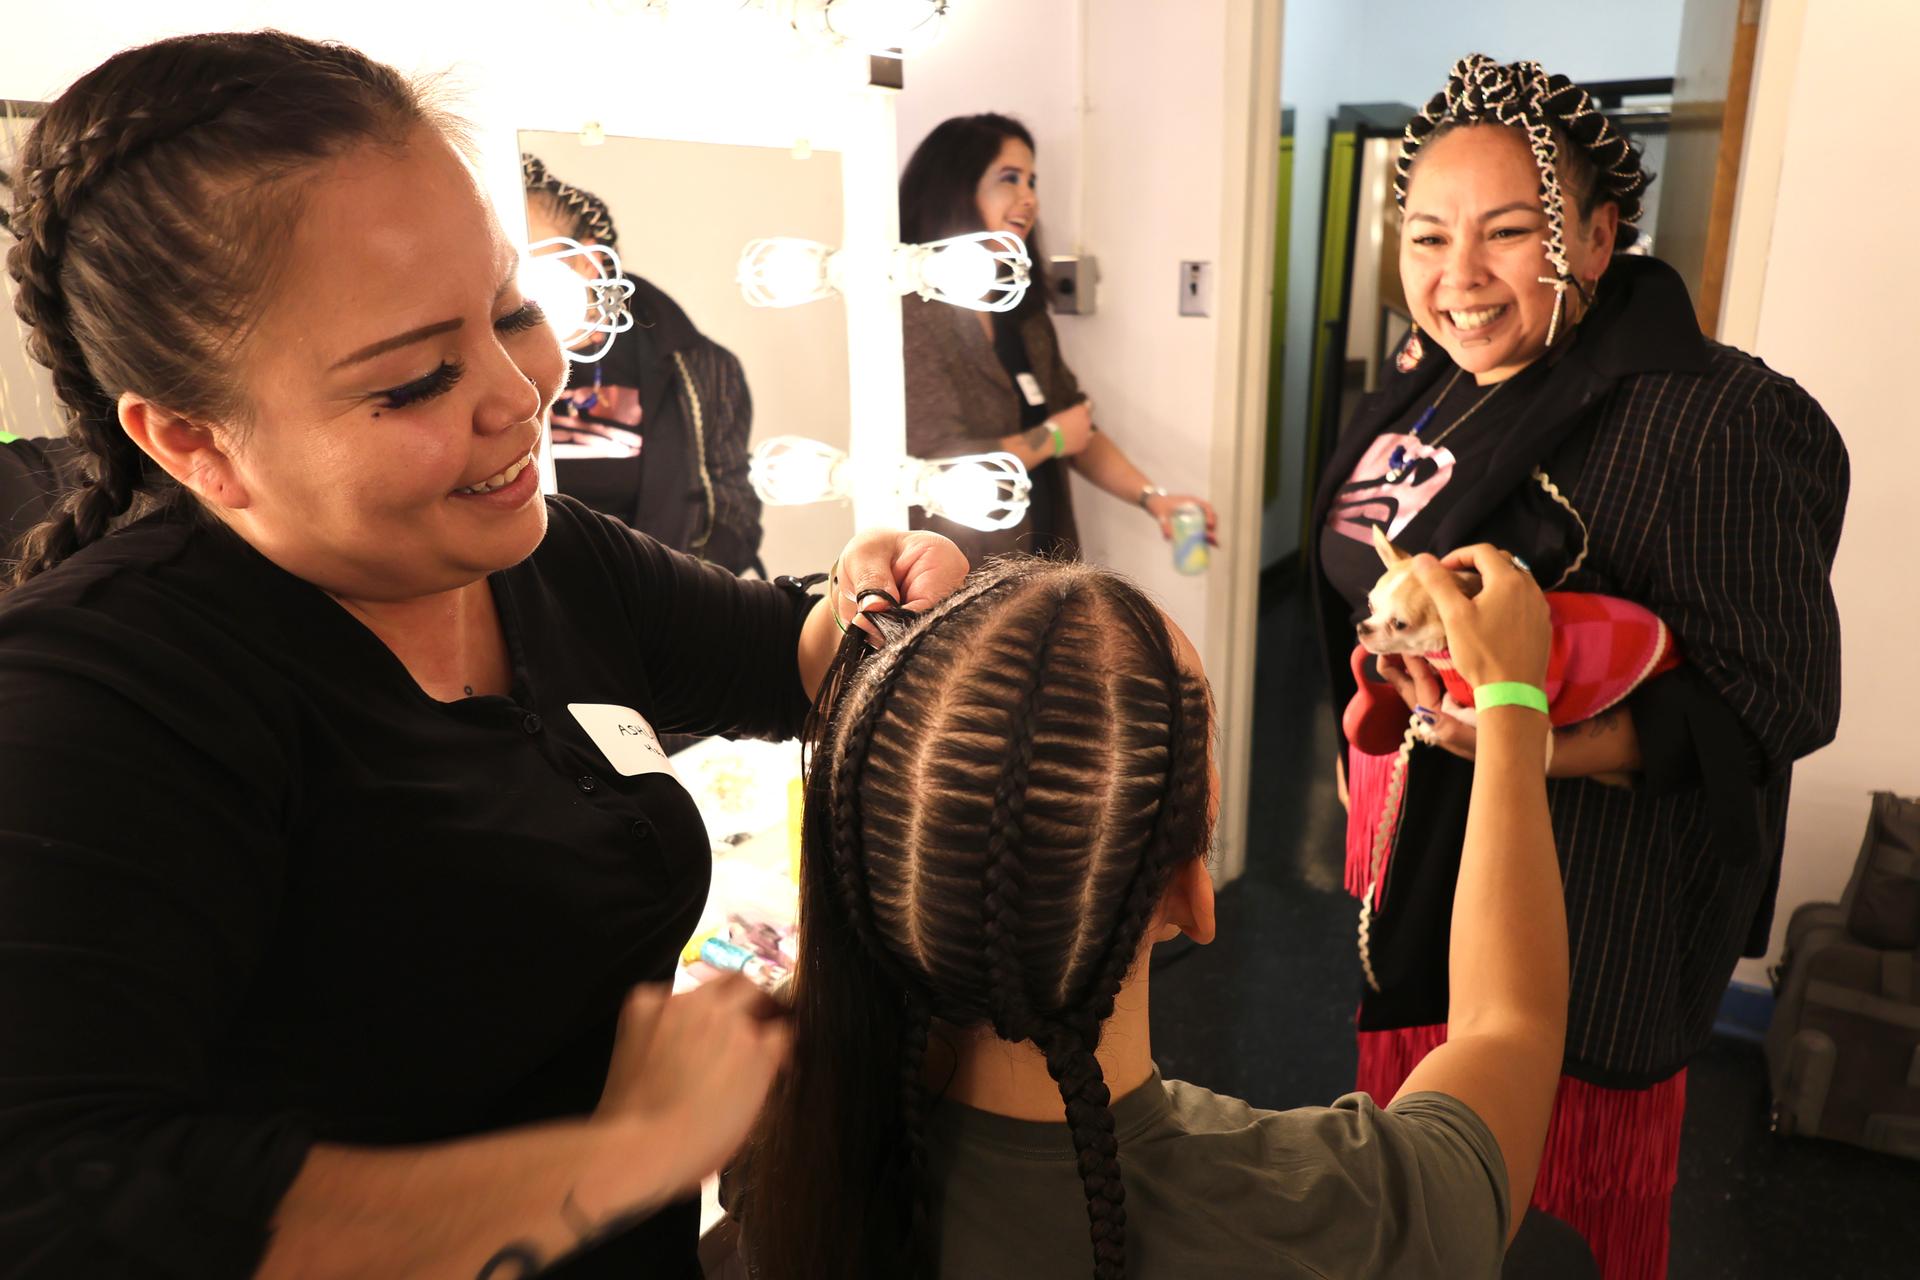 Hairstylist Ashley Jack (left) braids model Ricky-Lee Watts' (centre) hair before the Indigenous Futures streetwear fashion party.  Lauraleigh Paul (right) smiles while holding her dog.